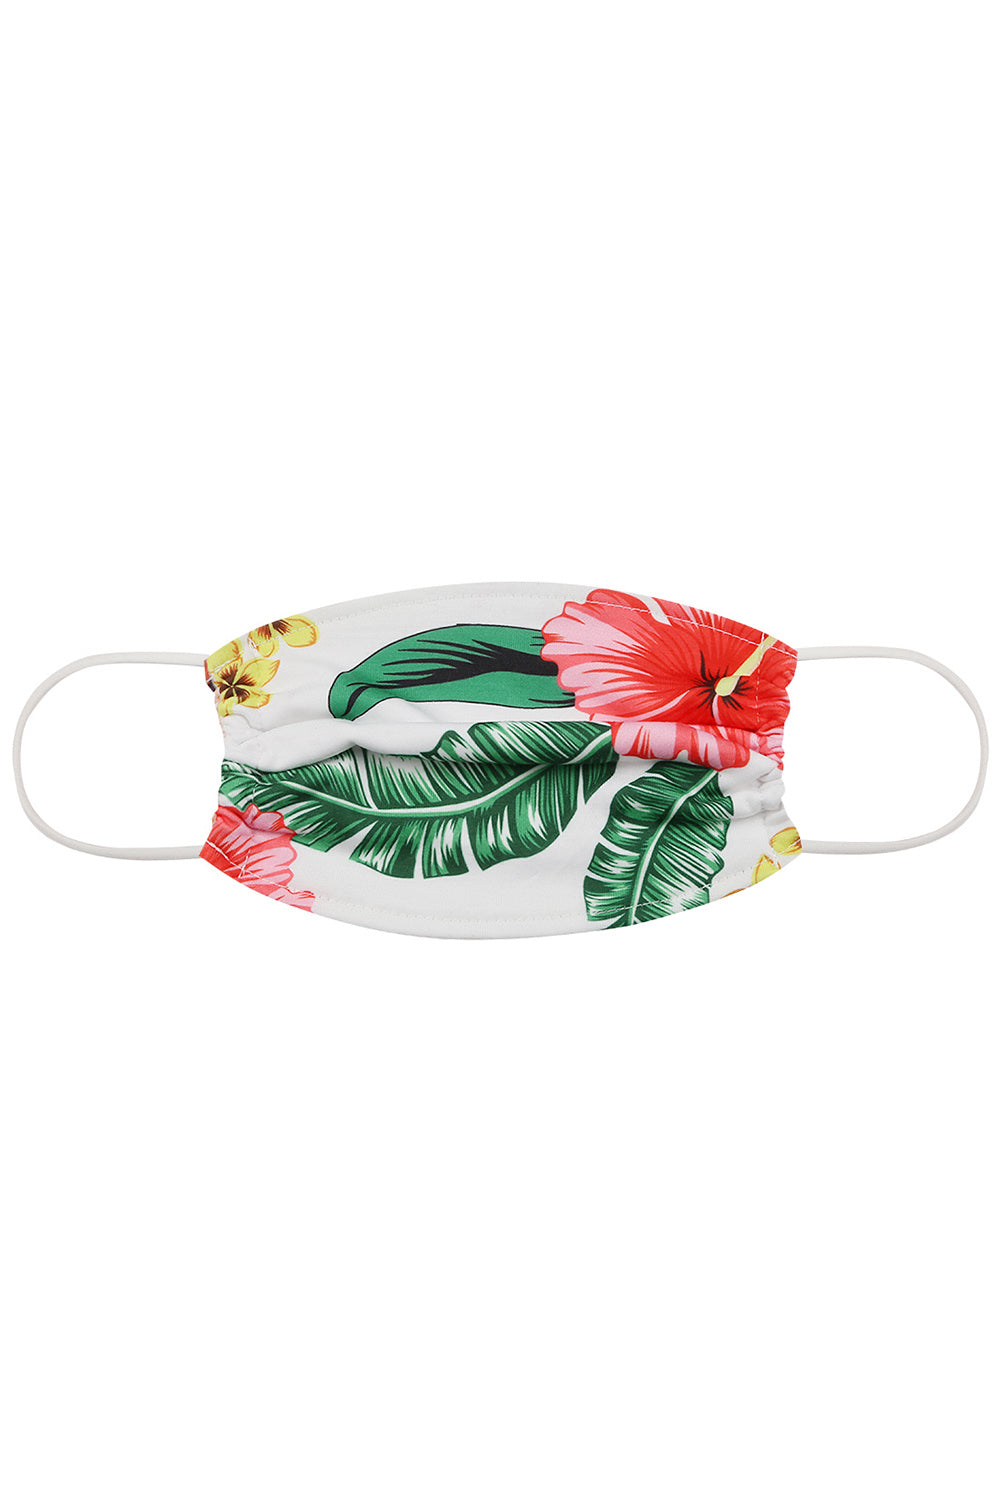 Face Mask Floral Print Ships from USA